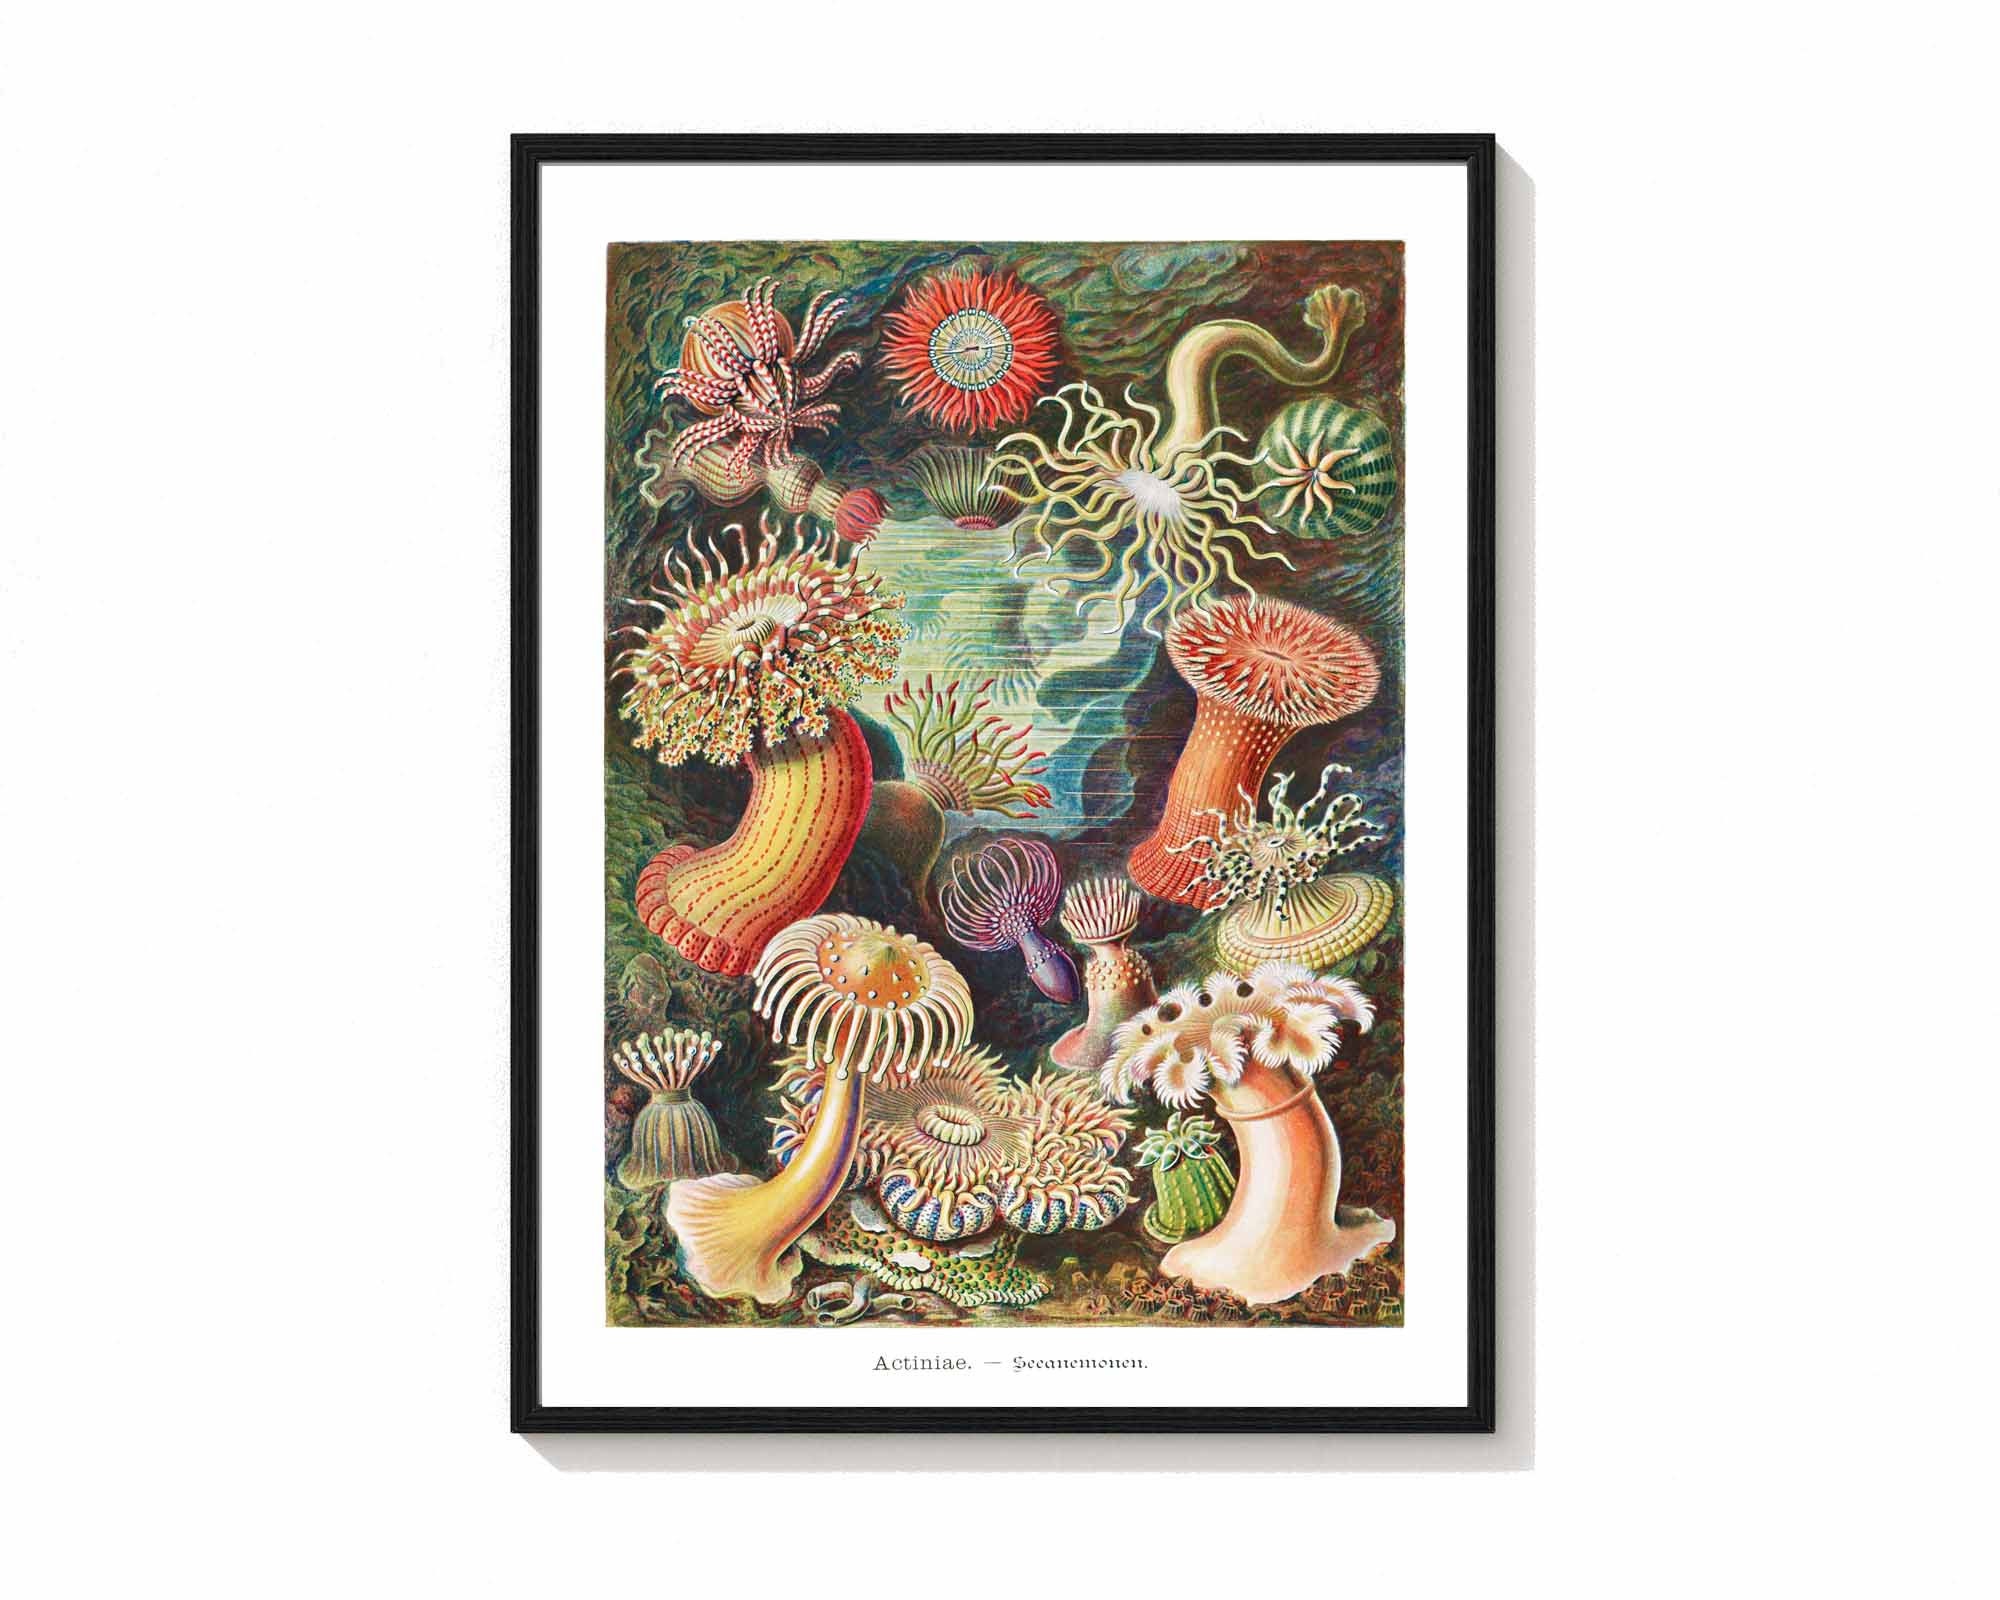 Actiniae Sea Anemone Wall Art Print Ernst Haeckel Colorful picture photo